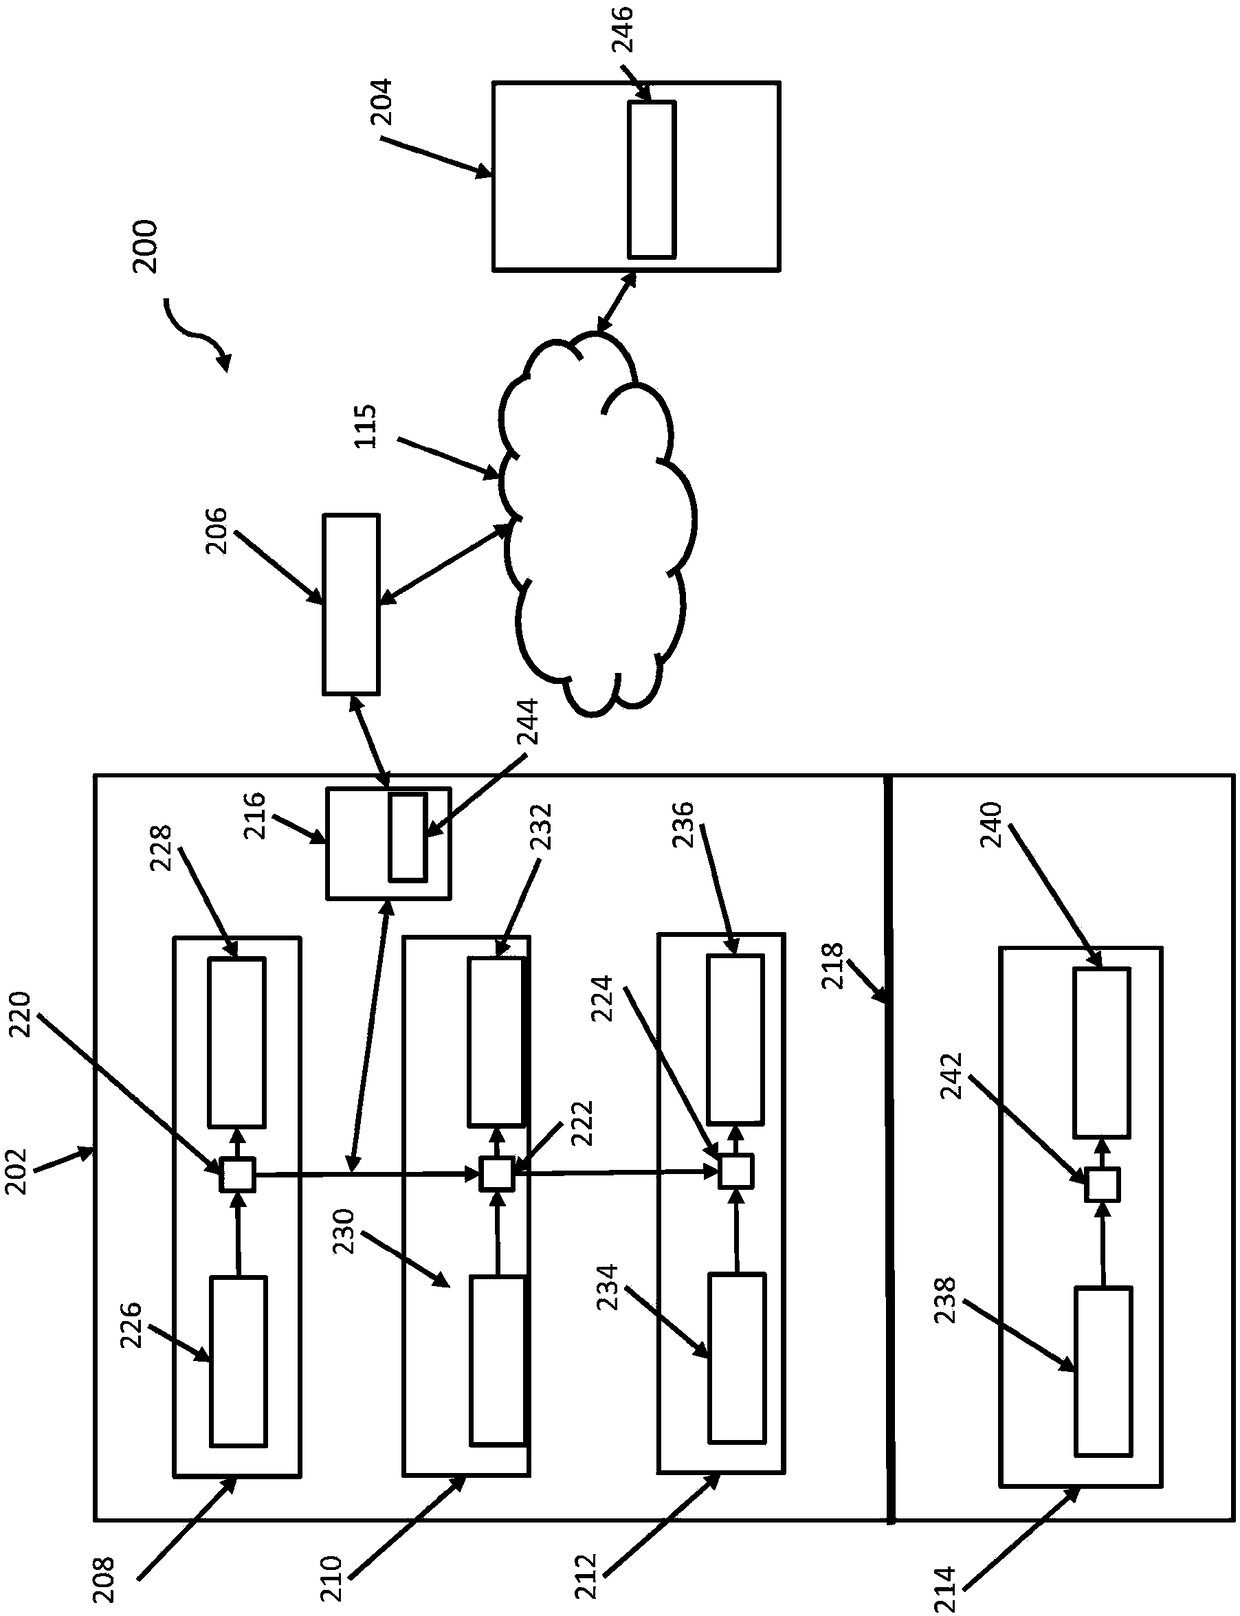 System and method for passive assessment of industrial perimeter security